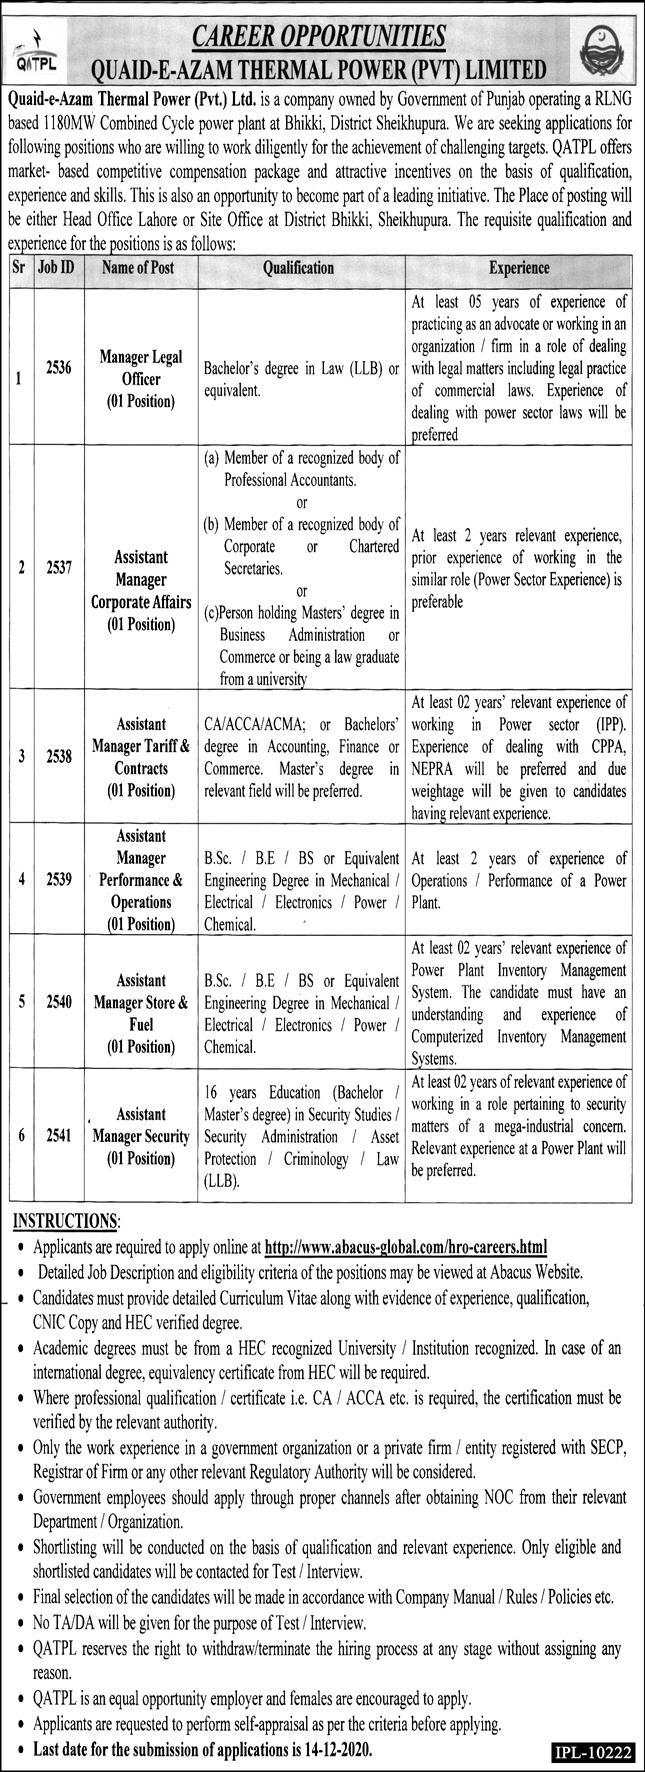 Government Jobs in Quaid-e-Azam Thermal Power